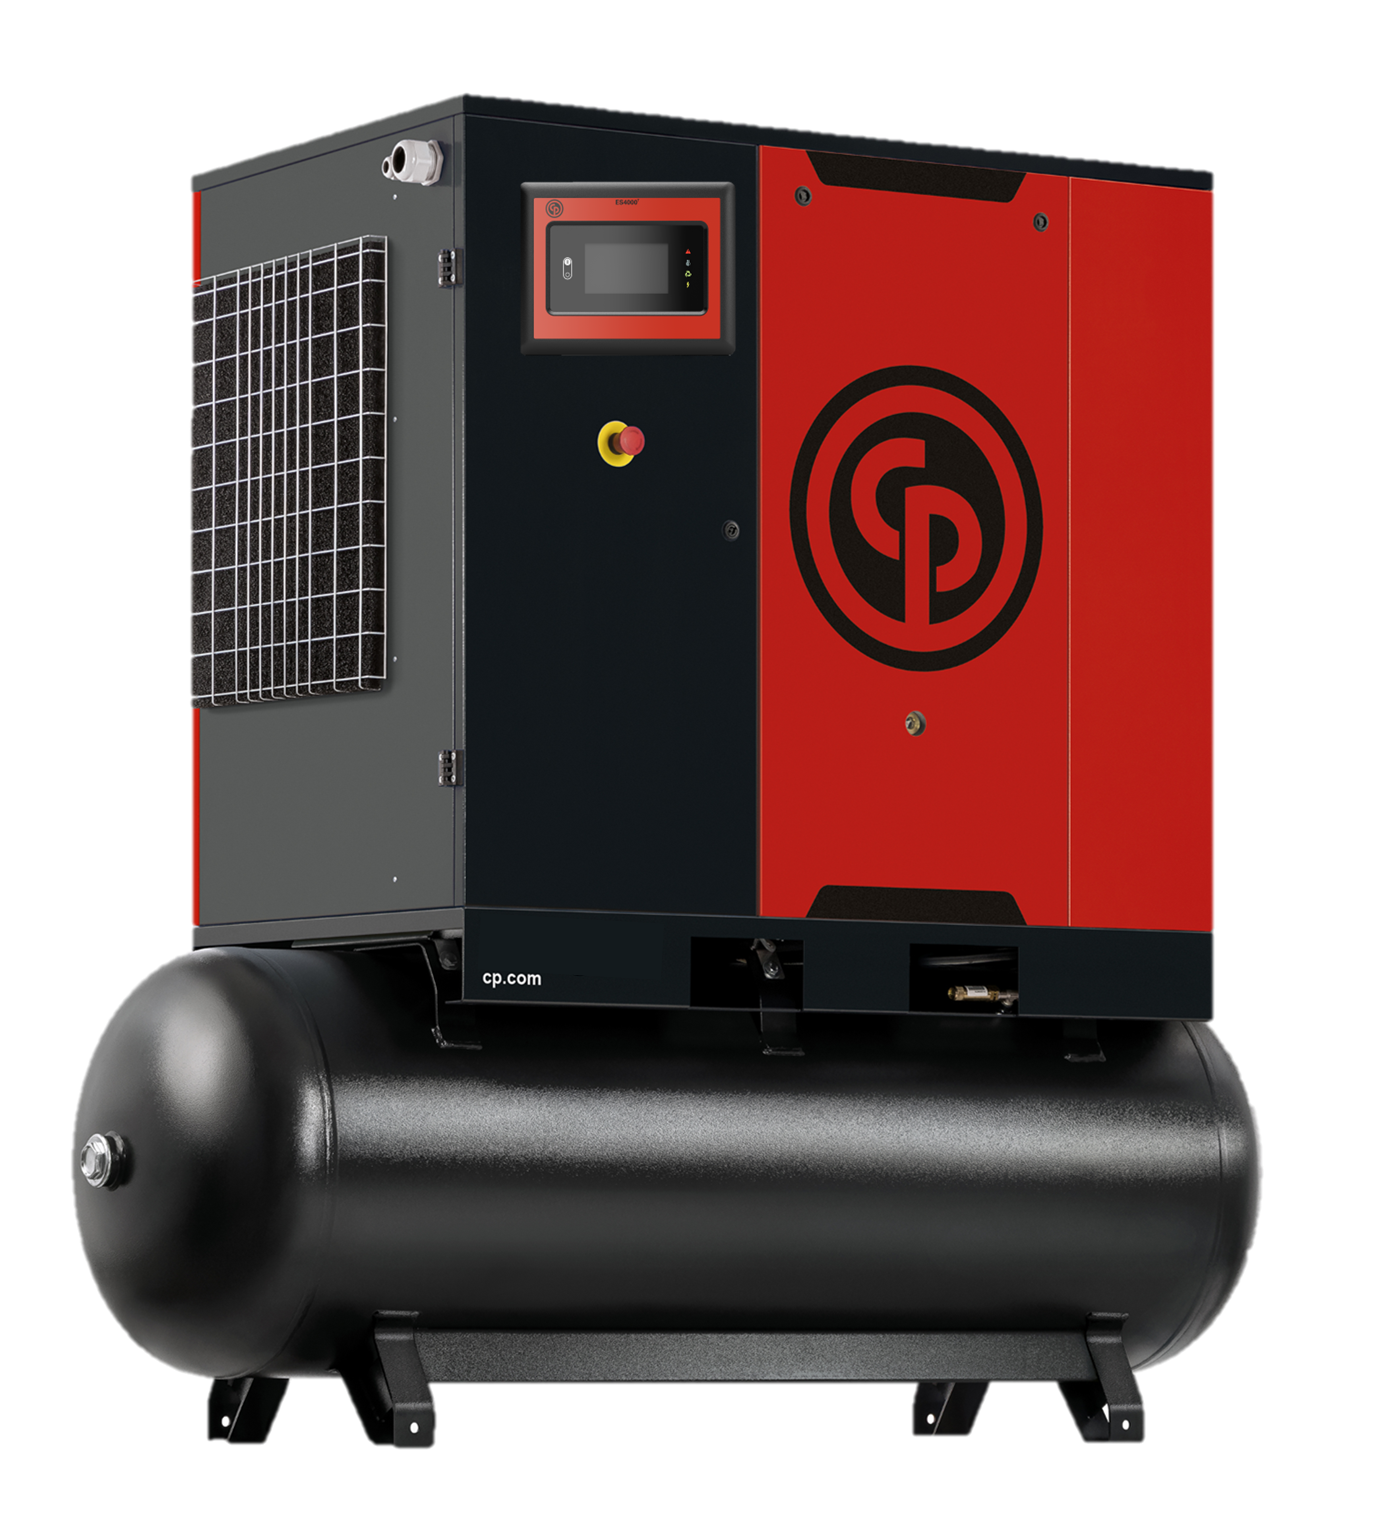 Chicago Pneumatic CPBg 25 HP Tank Mount Rotary Screw Air Compressor | 100.6 CFM@150 PSI, 208-230/460 volt, 3 Phase | 4152030662